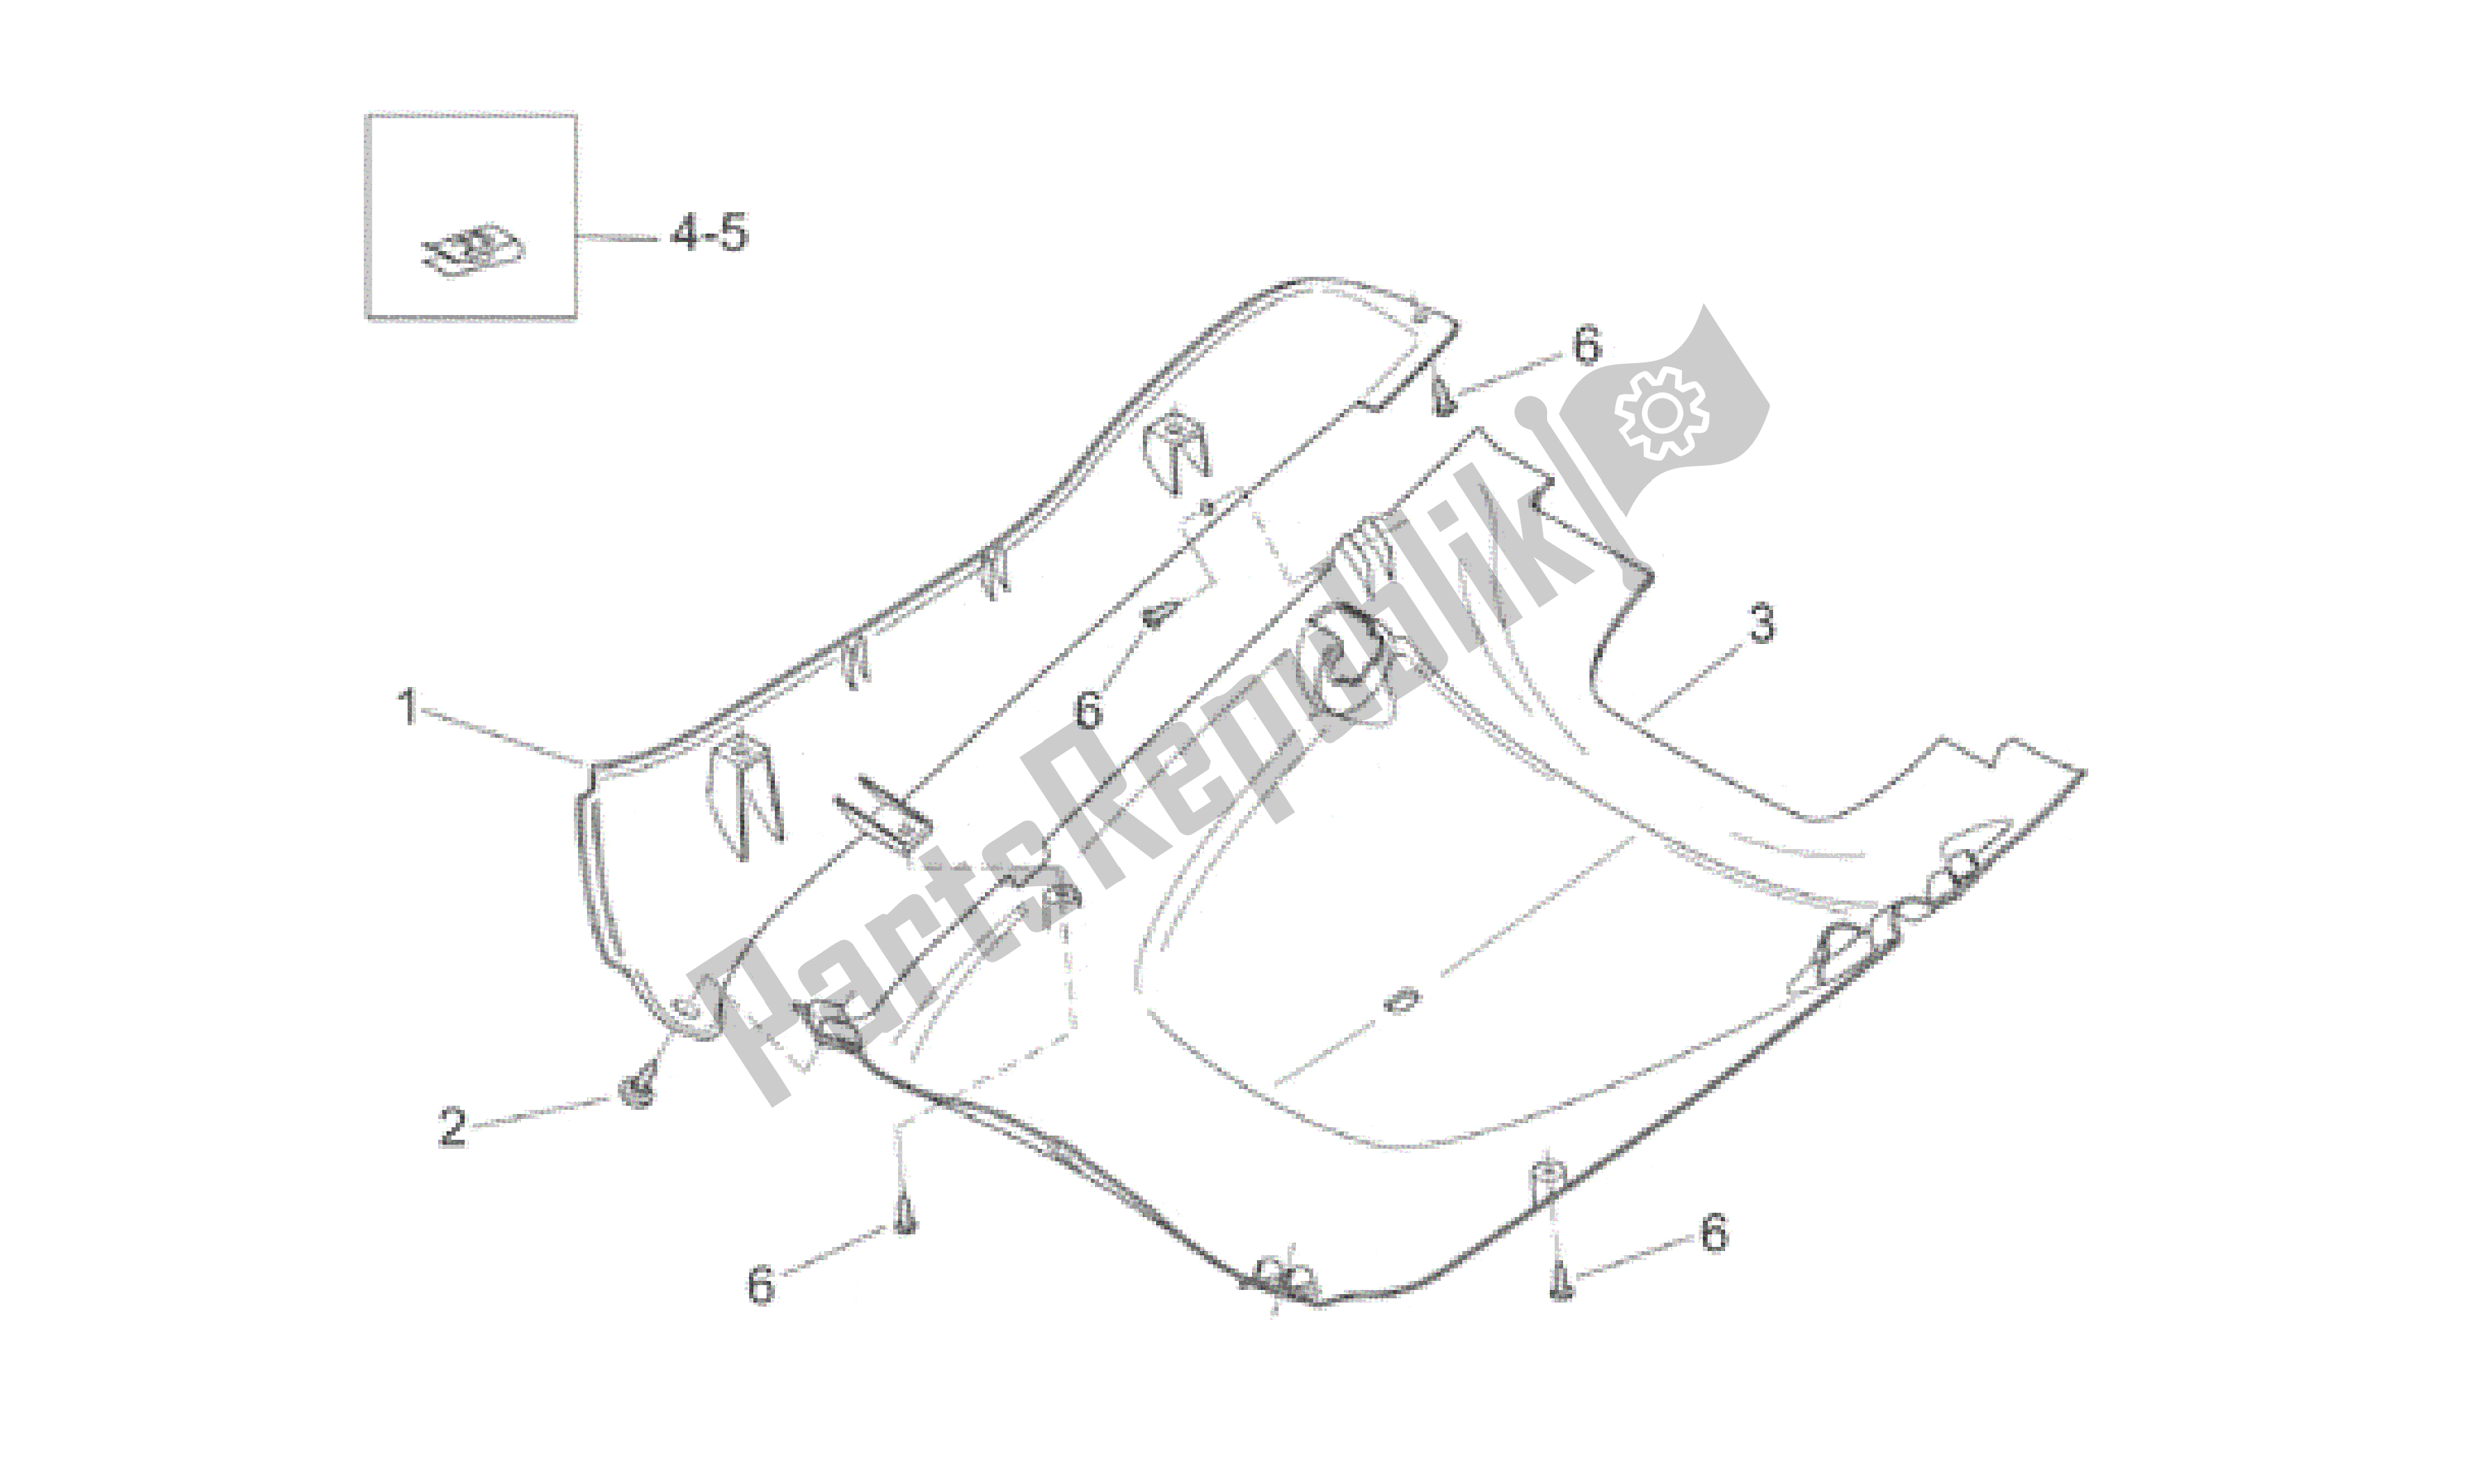 All parts for the Central Body Iii of the Aprilia Habana 50 1999 - 2001